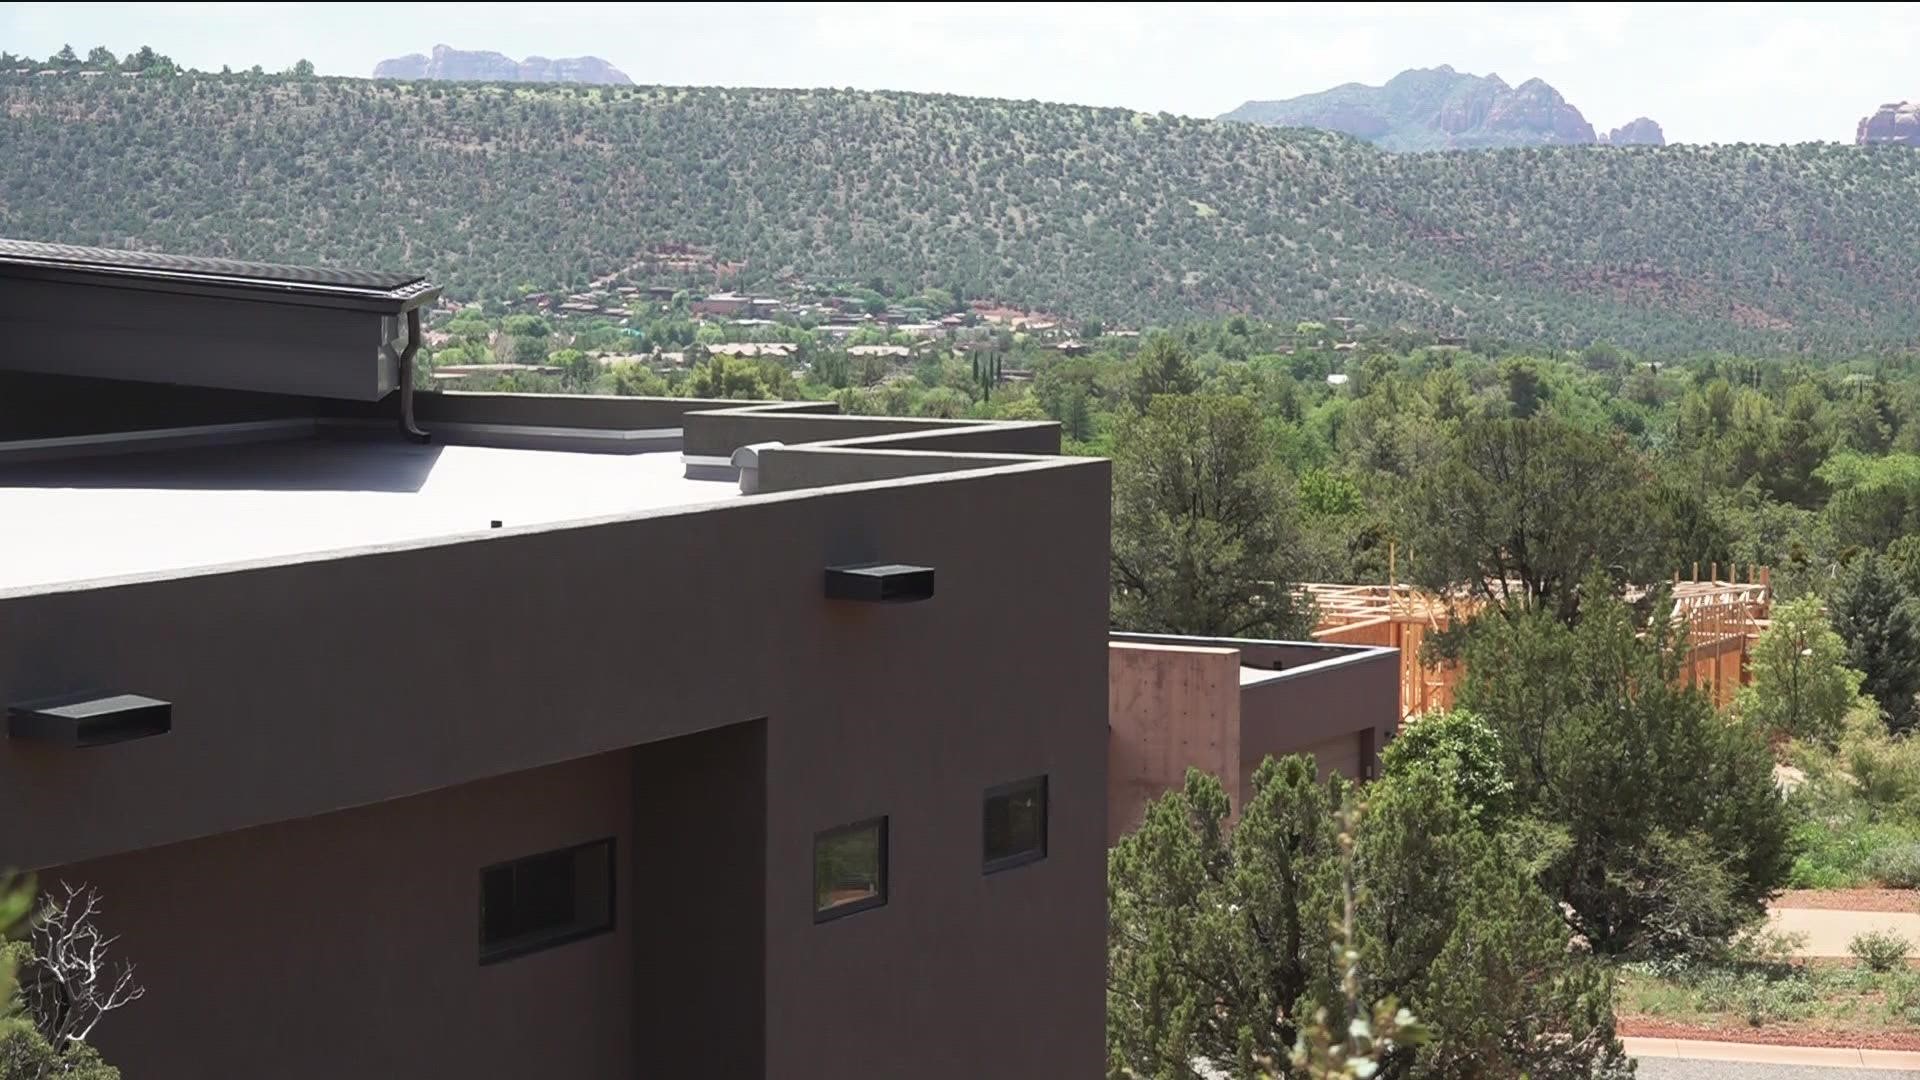 A lack of available housing has prompted Sedona to pilot a program that incentivizes homeowners to lease out their homes to local workers.